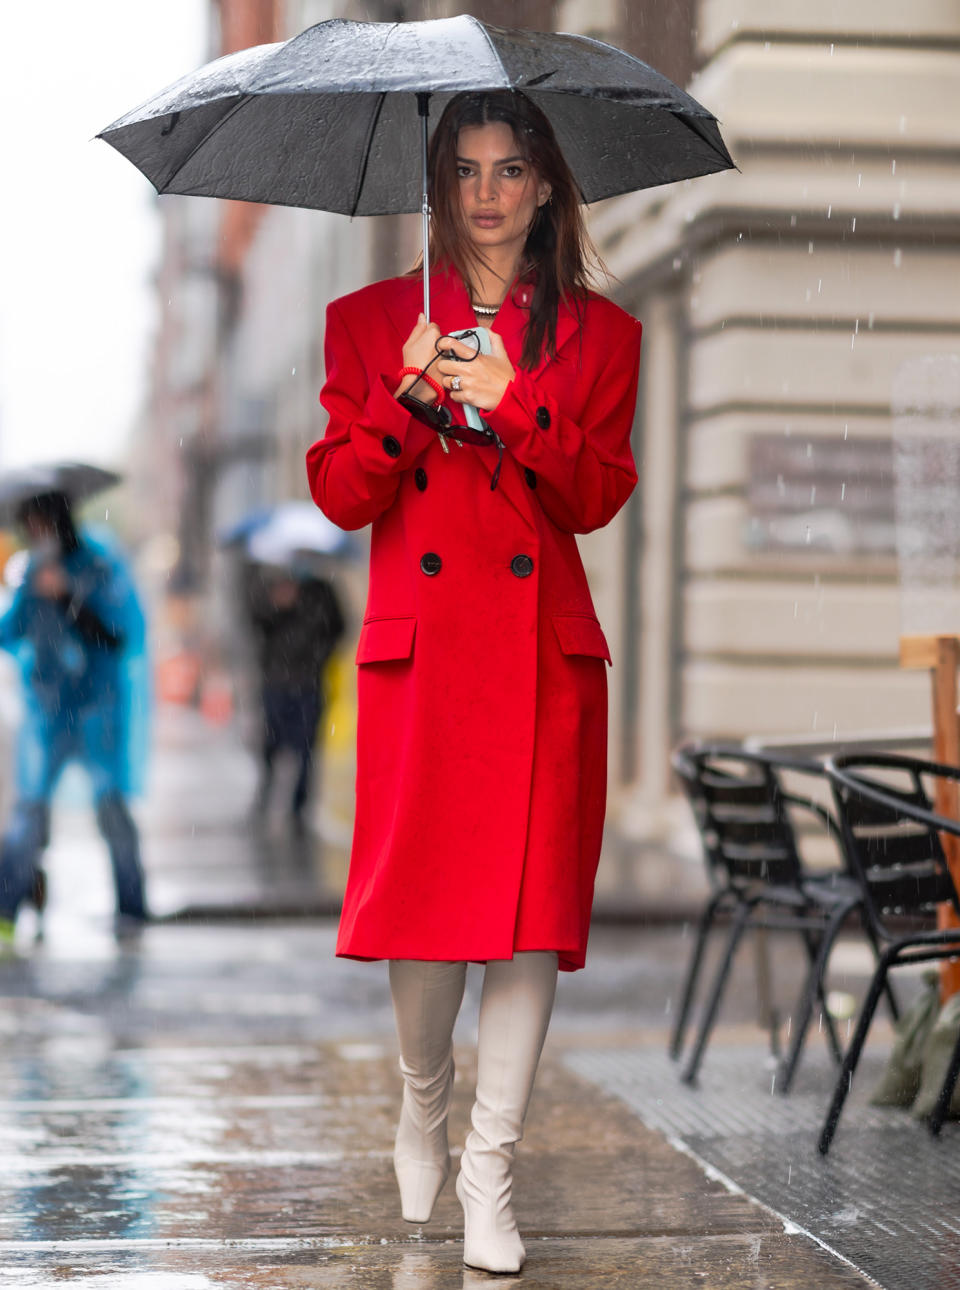 <p>Emily Ratajkowski braves the rain in an elegant red coat and white boots on Thursday in N.Y.C. </p>